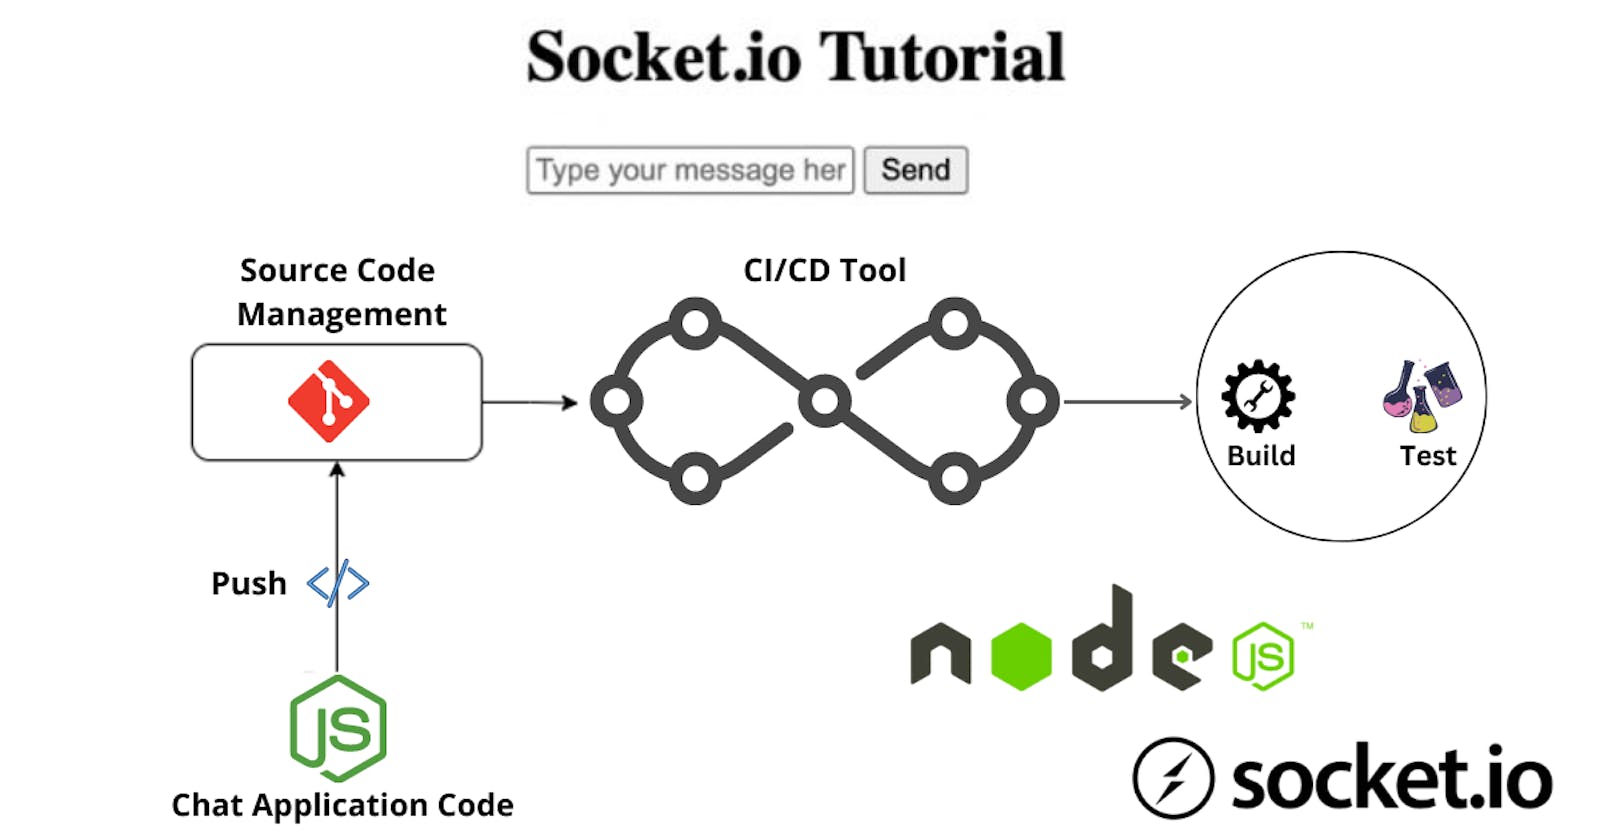 This is How I Built a Real-time Chat Application with Socket.io & Node.js [Added Automated Testing]